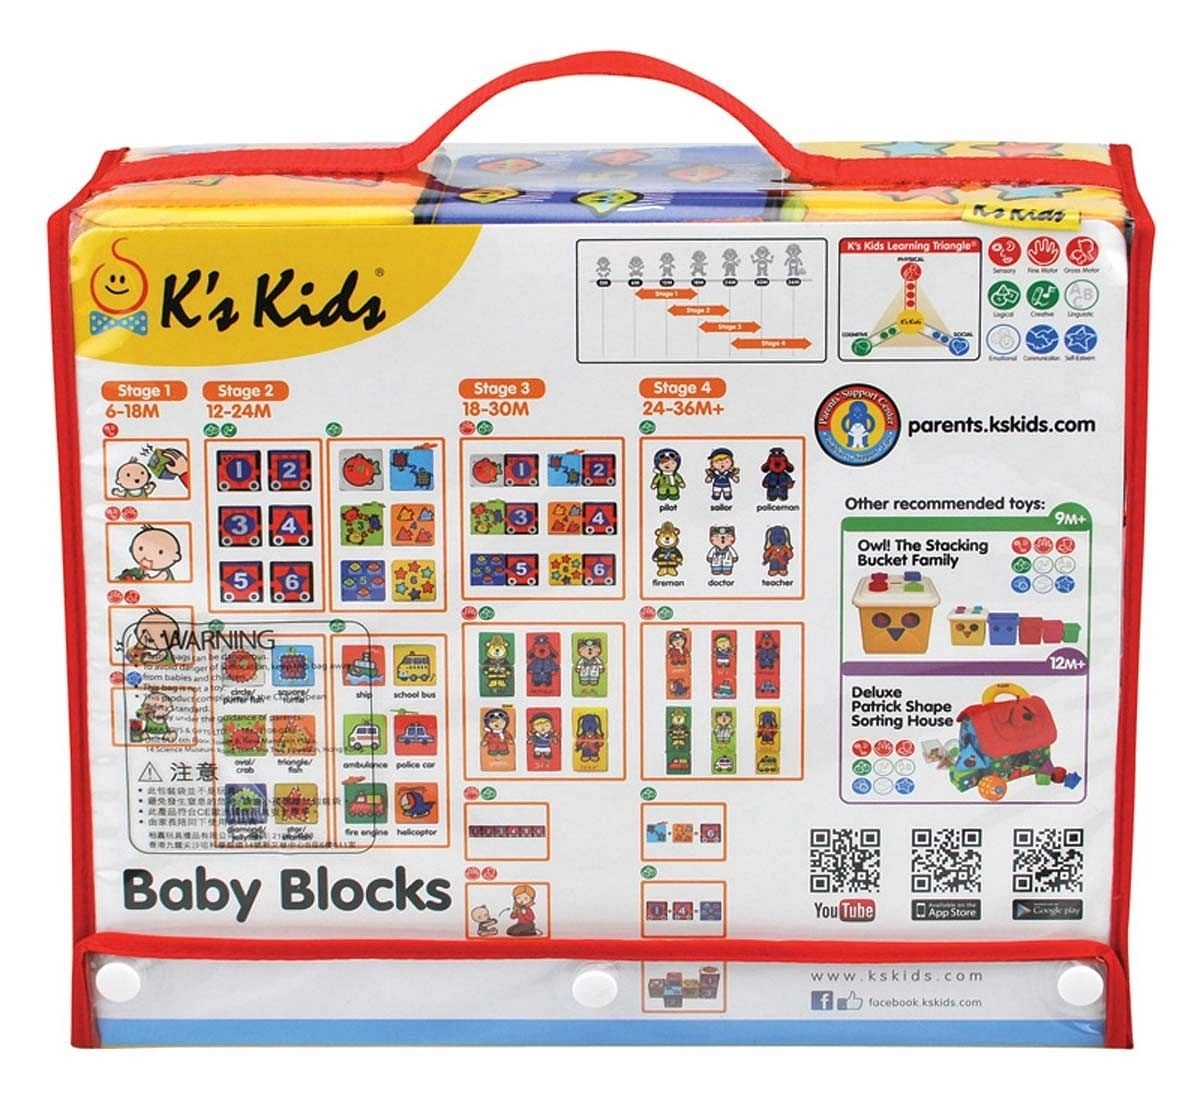 K'S Kids Baby Blocks Early Learner Toys for Kids age 0M+ 